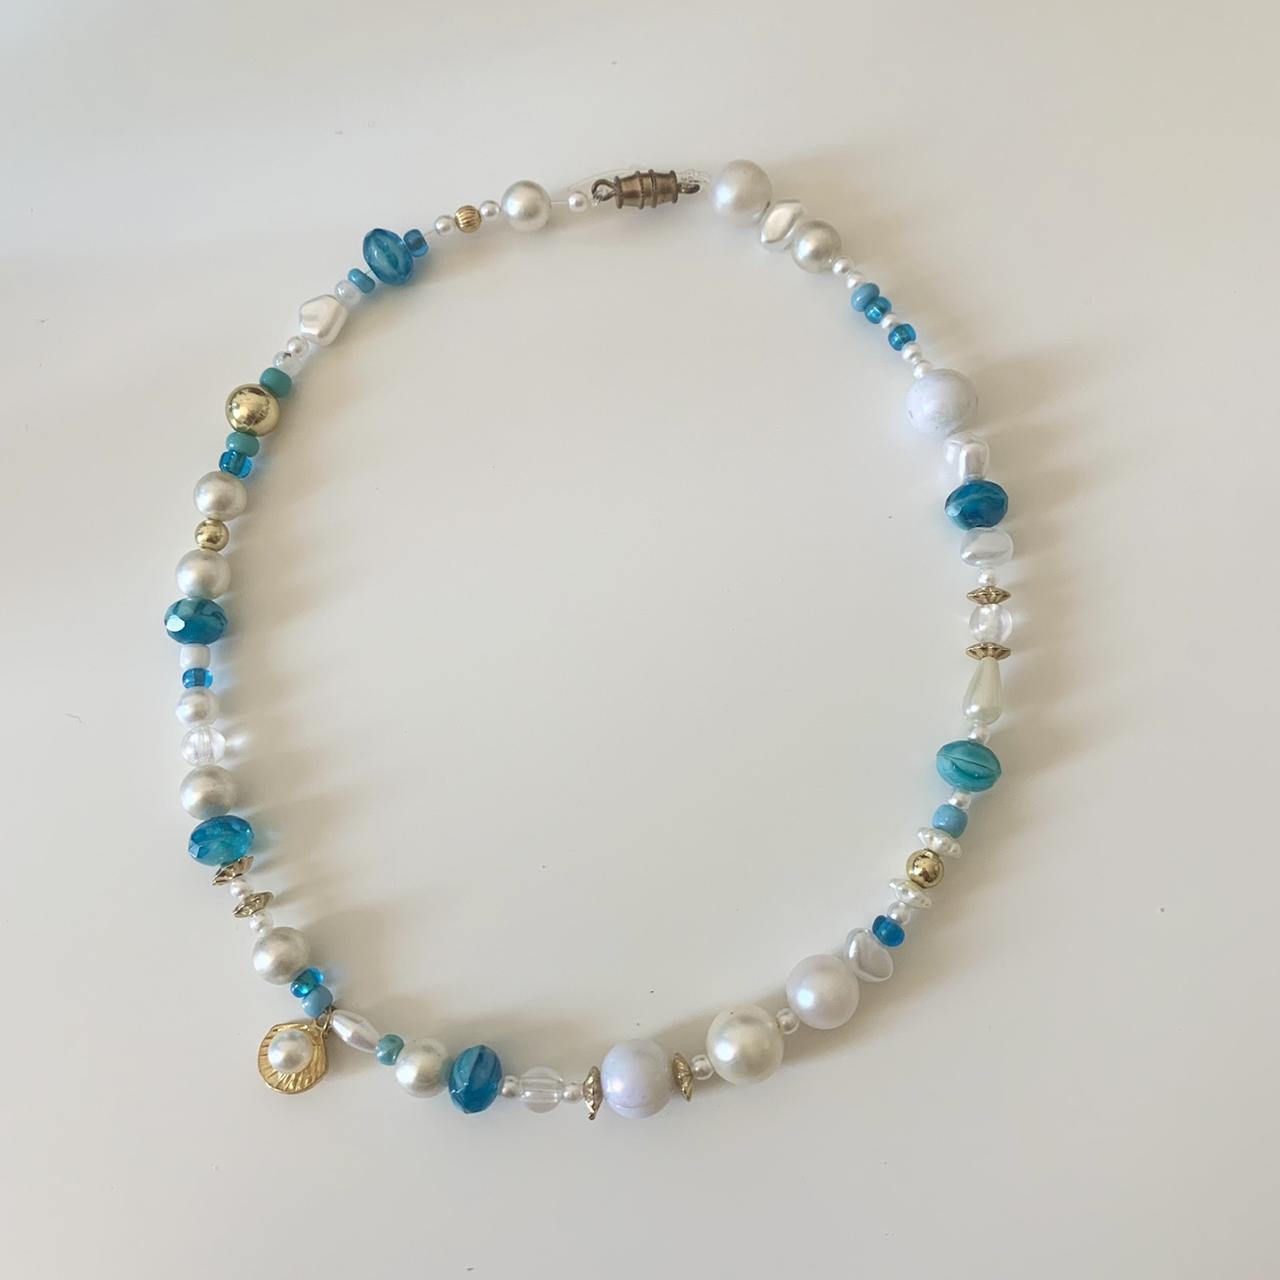 Women's White and Blue Jewellery (2)